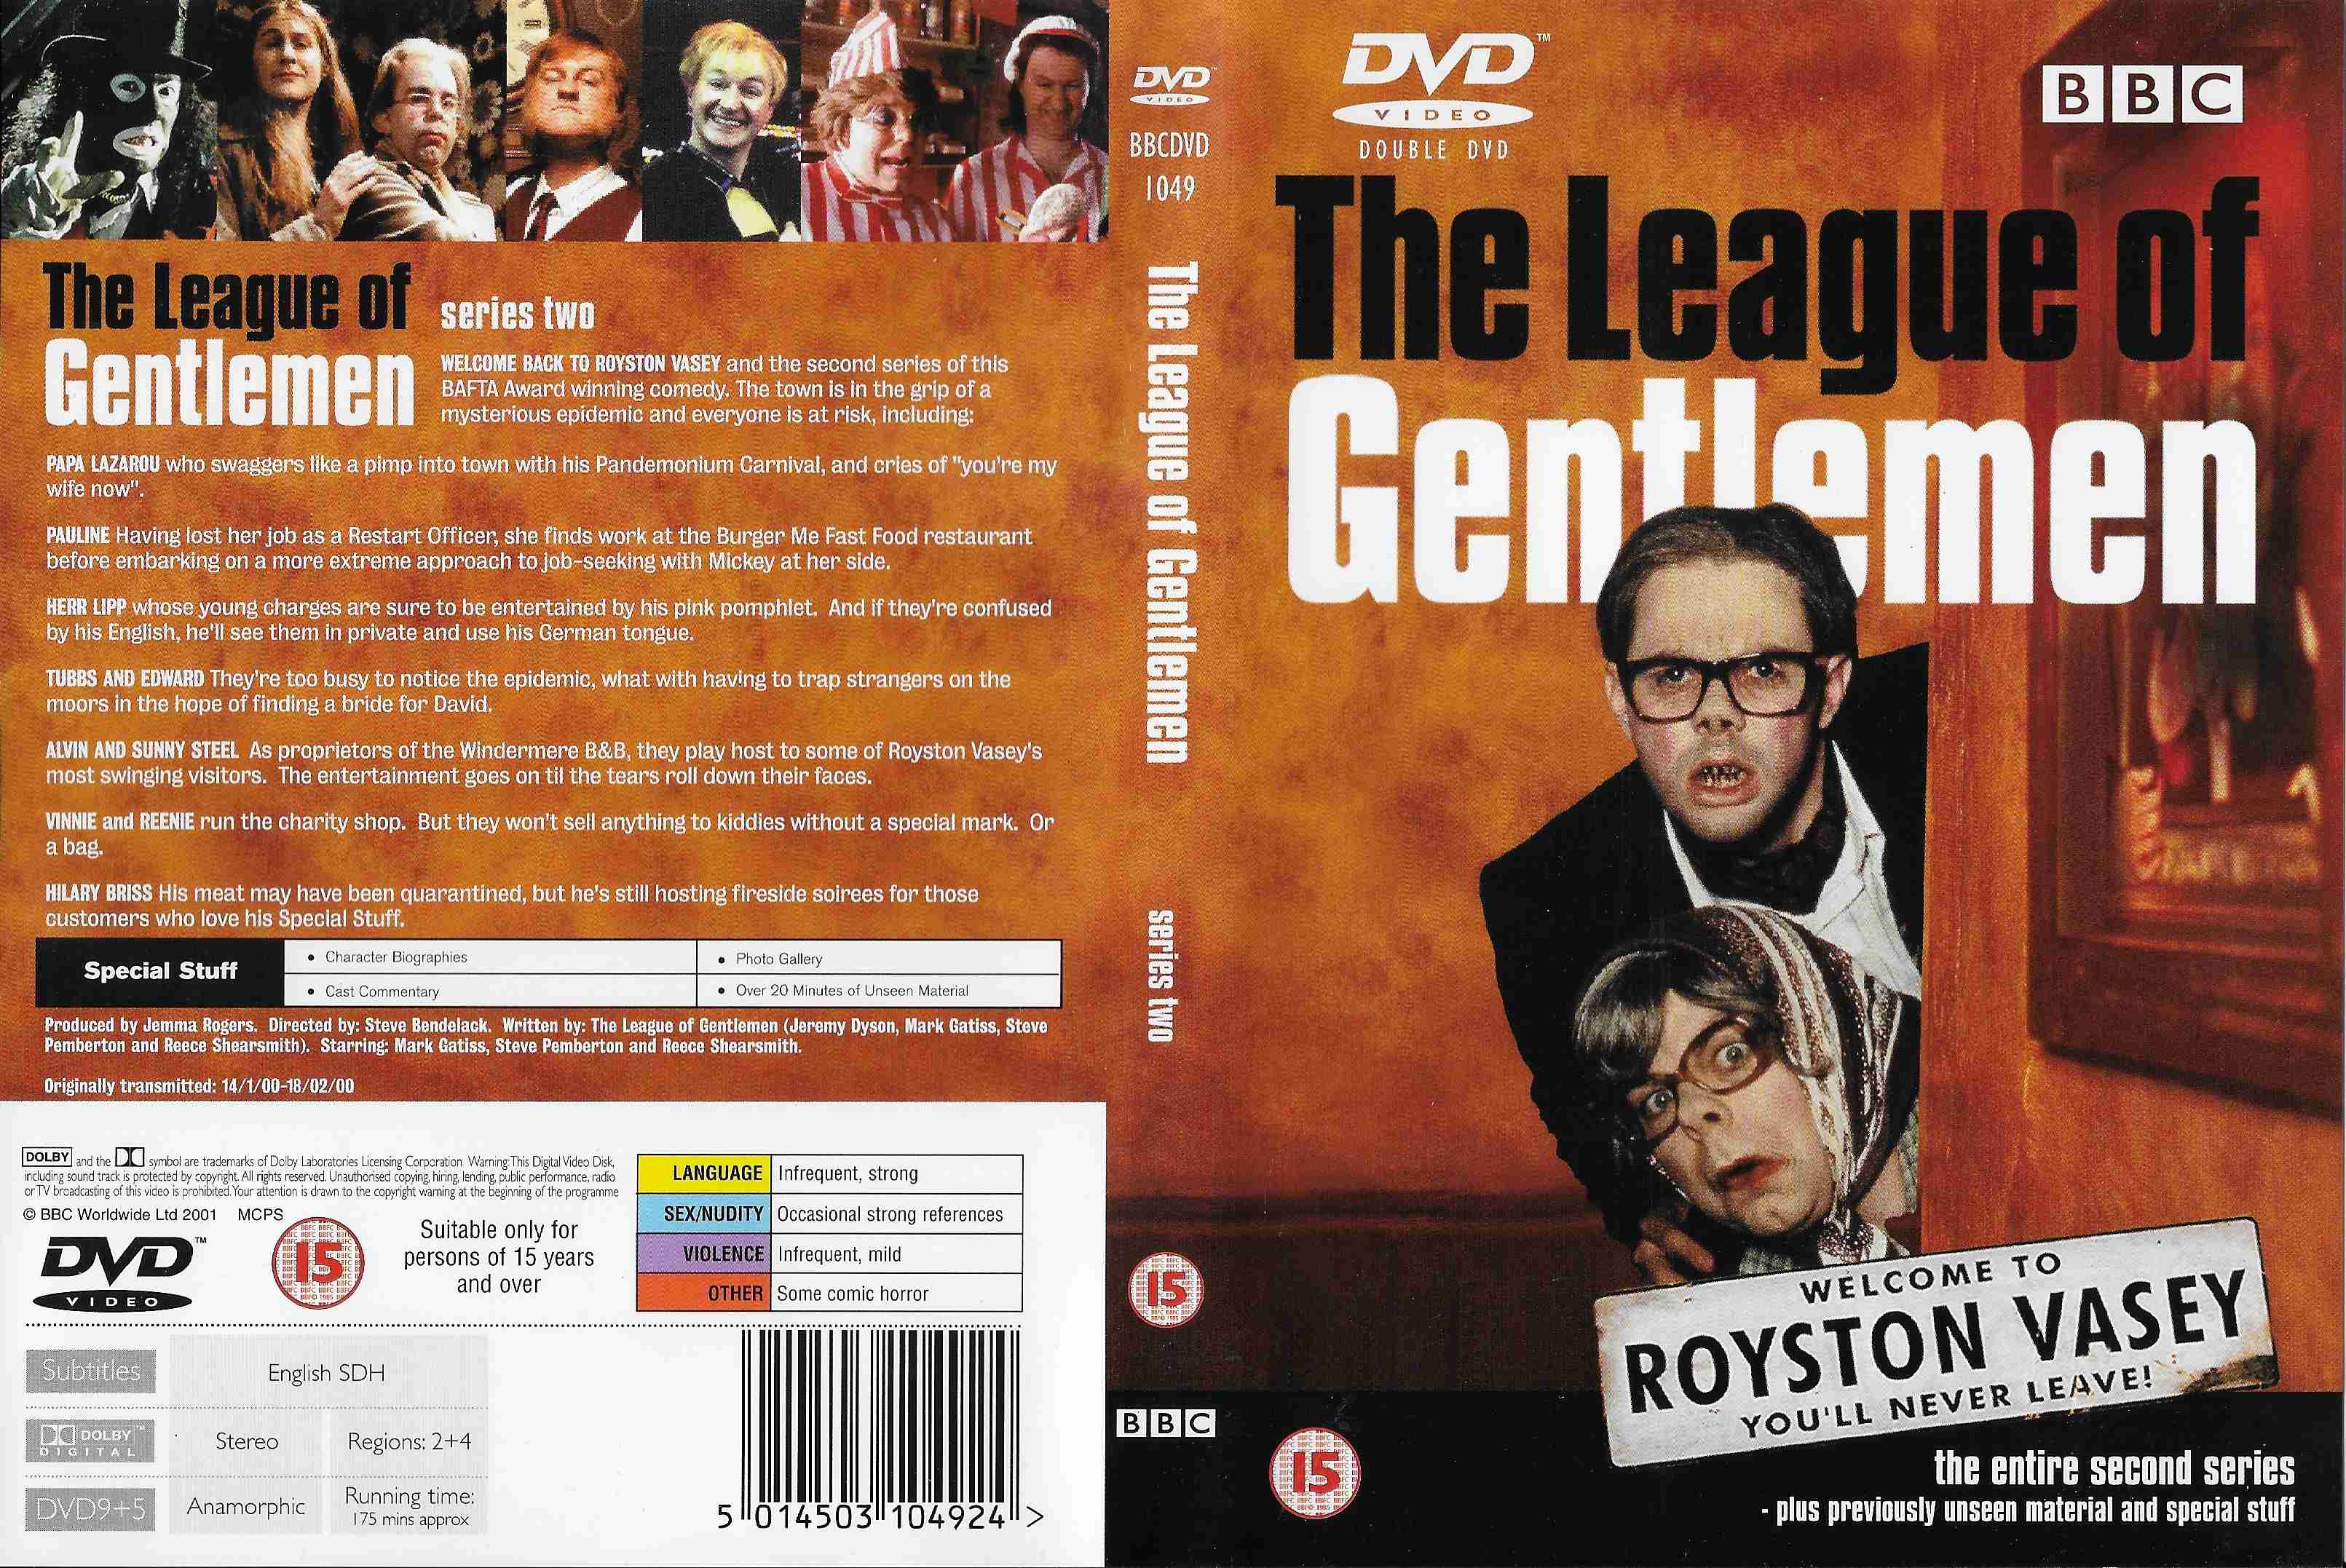 Picture of BBCDVD 1049 The league of gentlemen - Series 2 by artist Mark Gatiss / Steve Pemberton / Reece Shearsmith from the BBC records and Tapes library